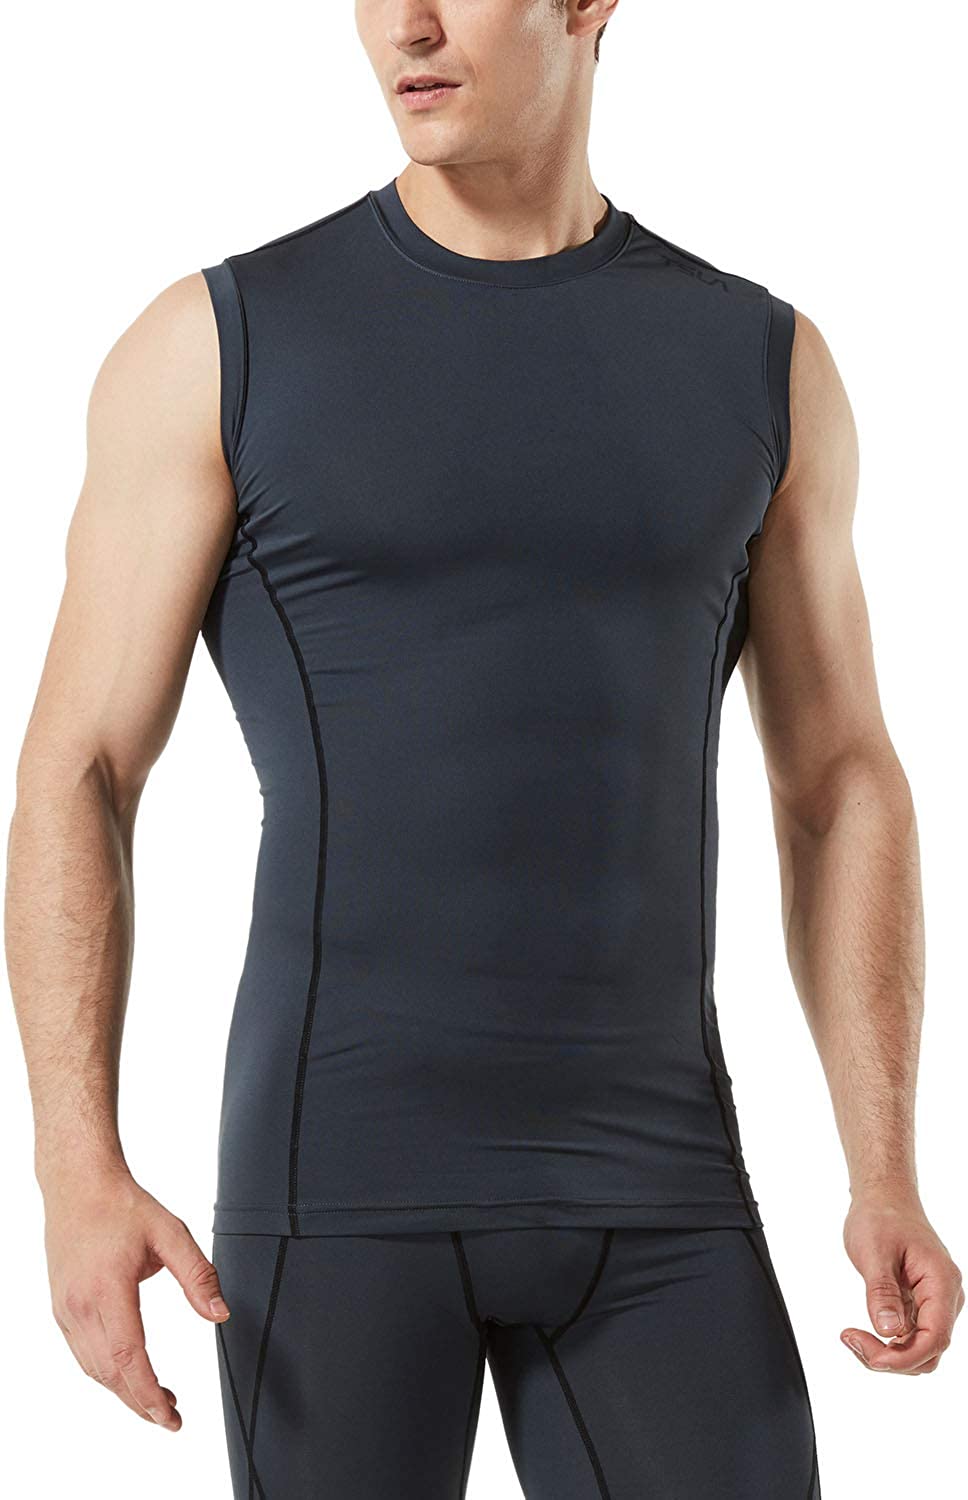 Details about   TSLA 1 or 3 Pack Men's Sleeveless Workout Shirts Dry Fit Running Compression Cu 